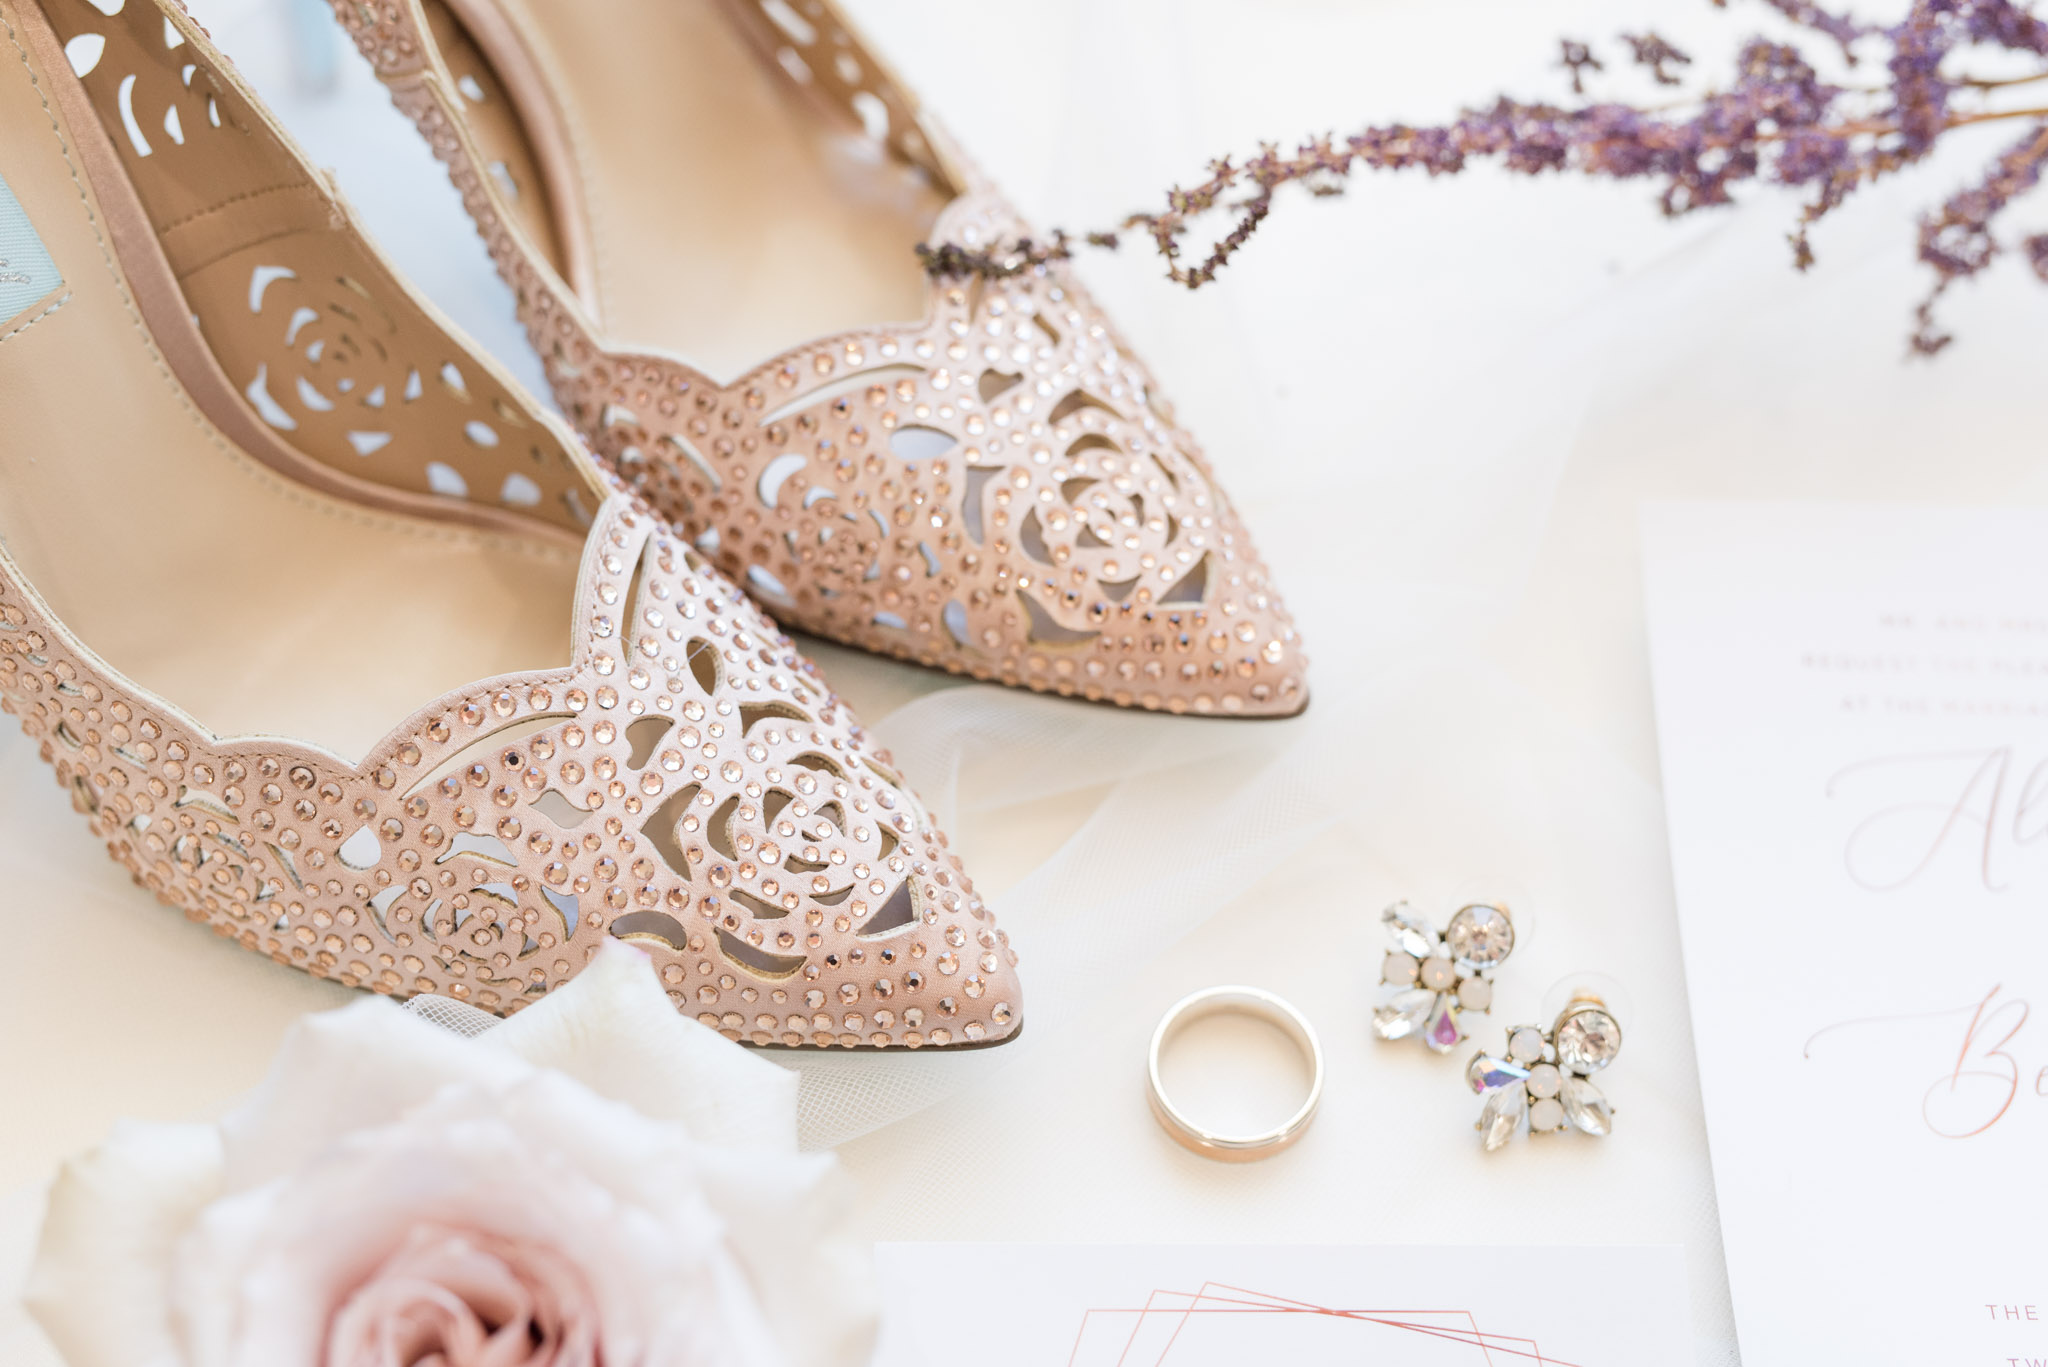 Wedding shoes and jewelry.